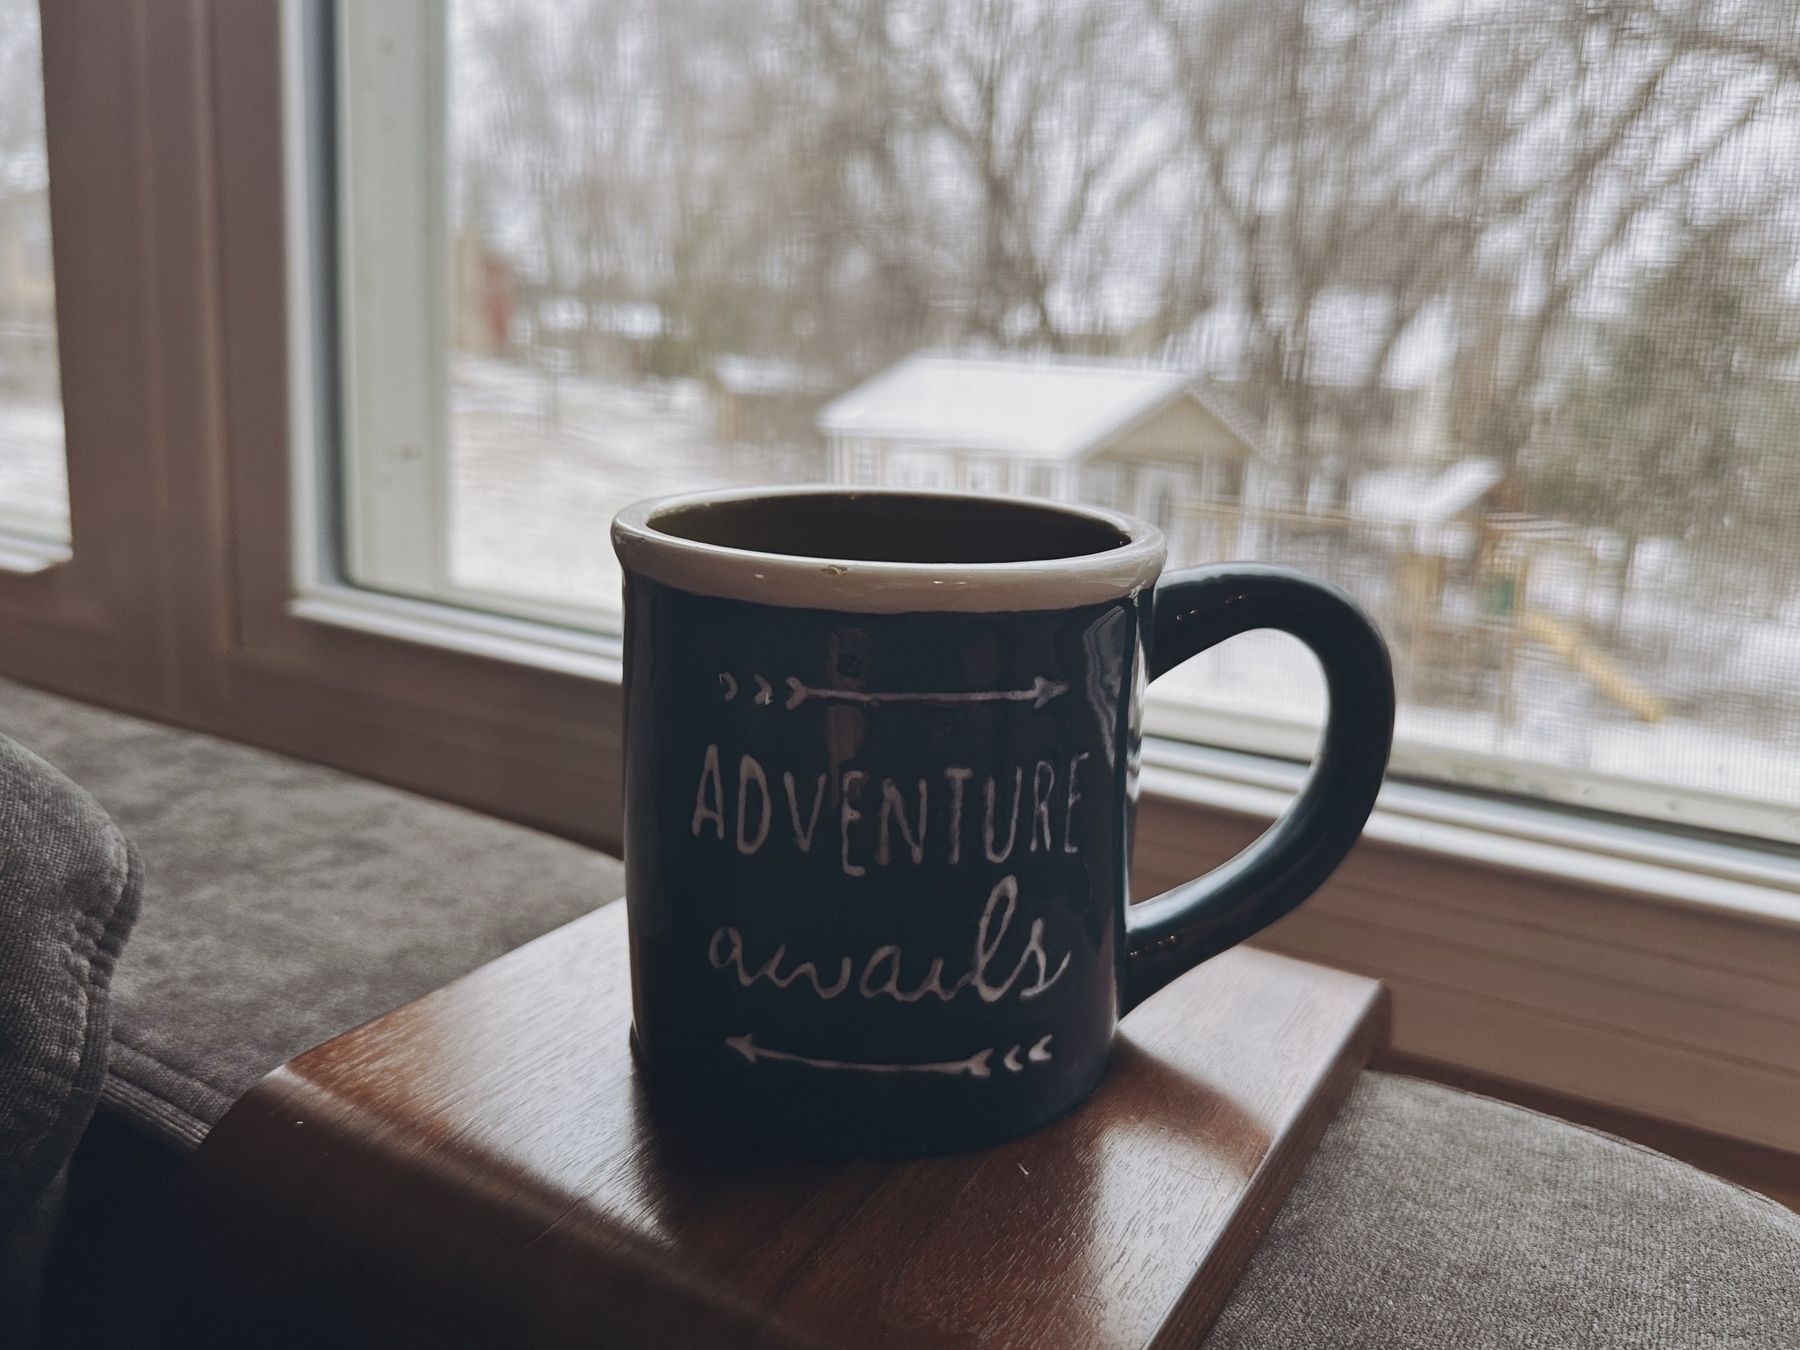 A mug with “ADVENTURE awaits” text is resting on a wooden surface, with a snowy residential view seen through a window in the background.